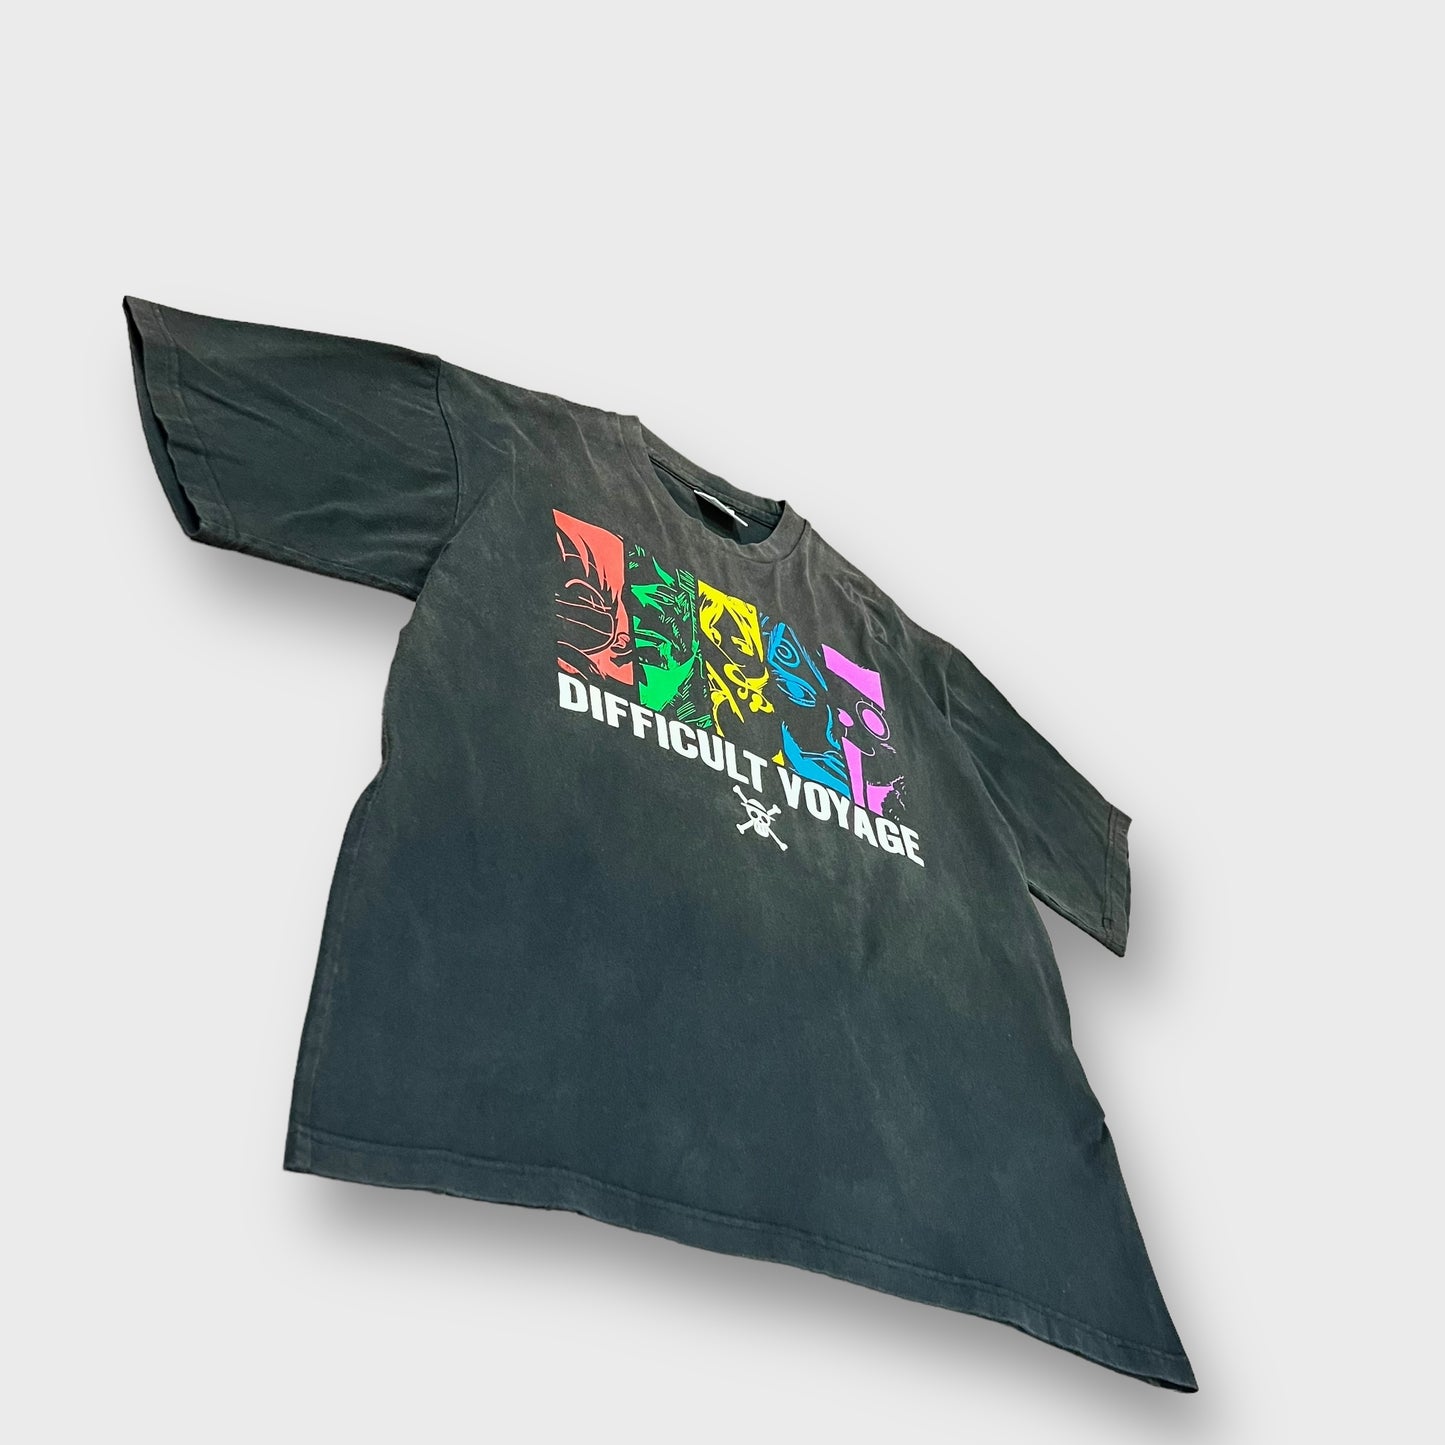 00’s “ONE PICE”anime t-shirt